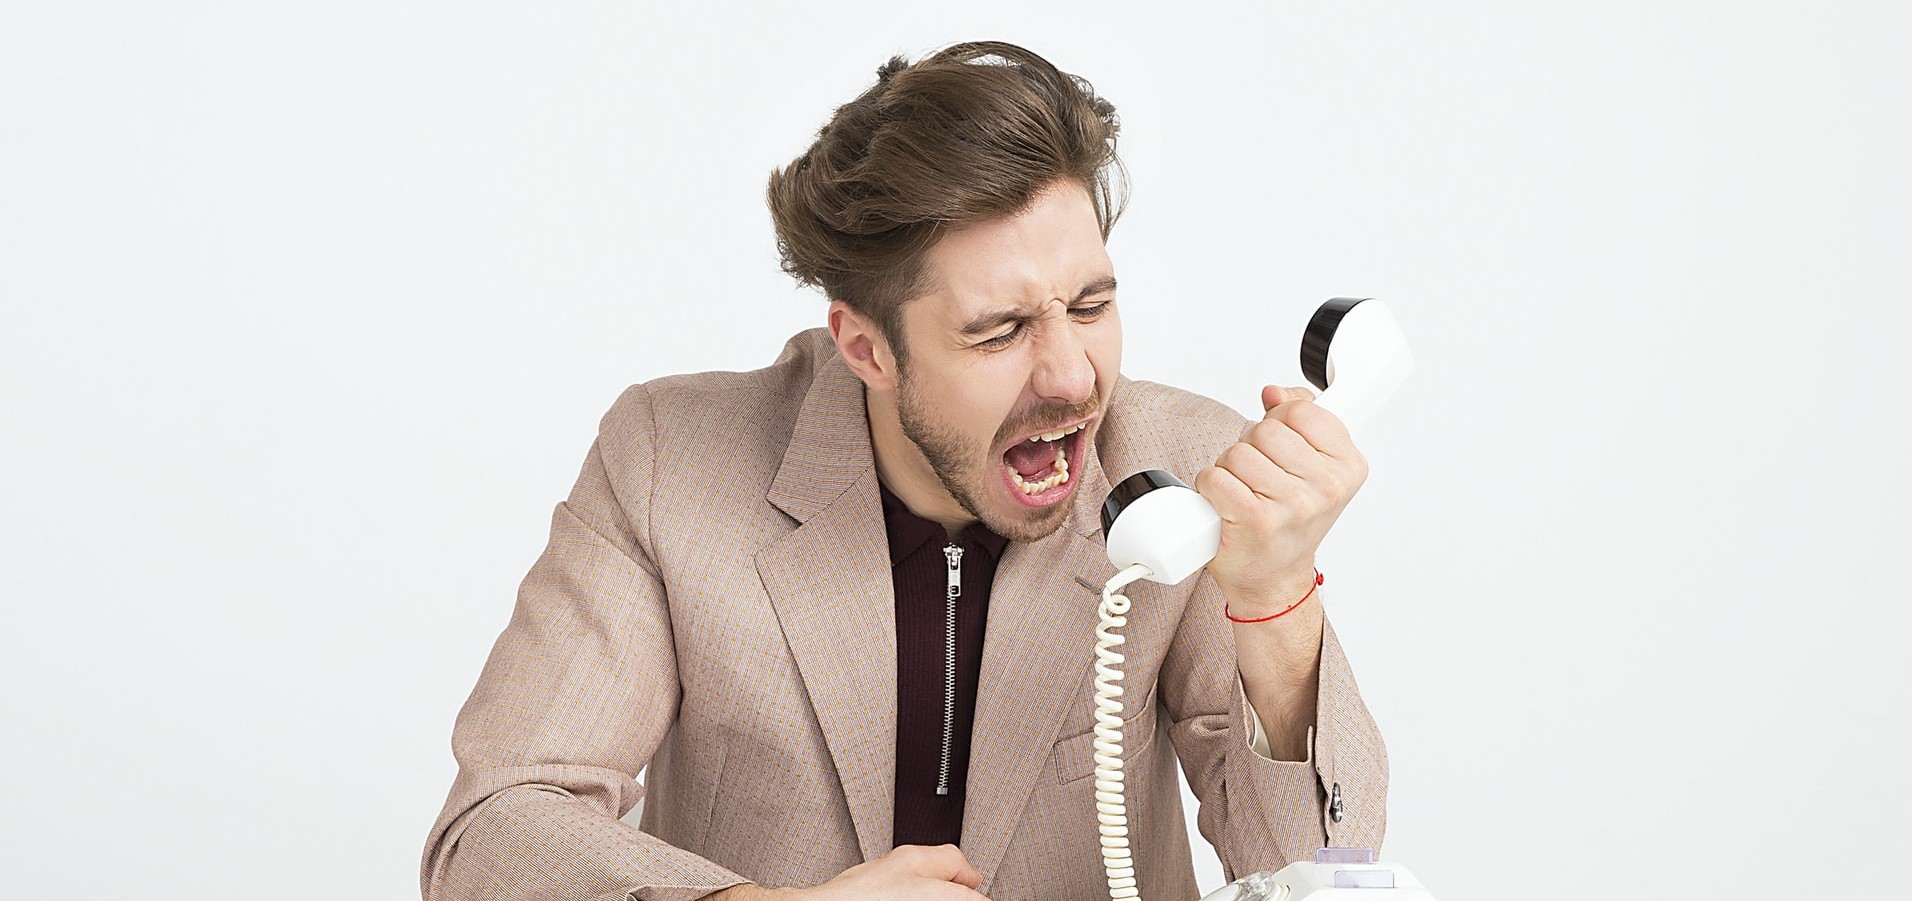 how to deal with difficult legal clients. image: a man in professional clothing yelling angrily into an old-fashioned telephone